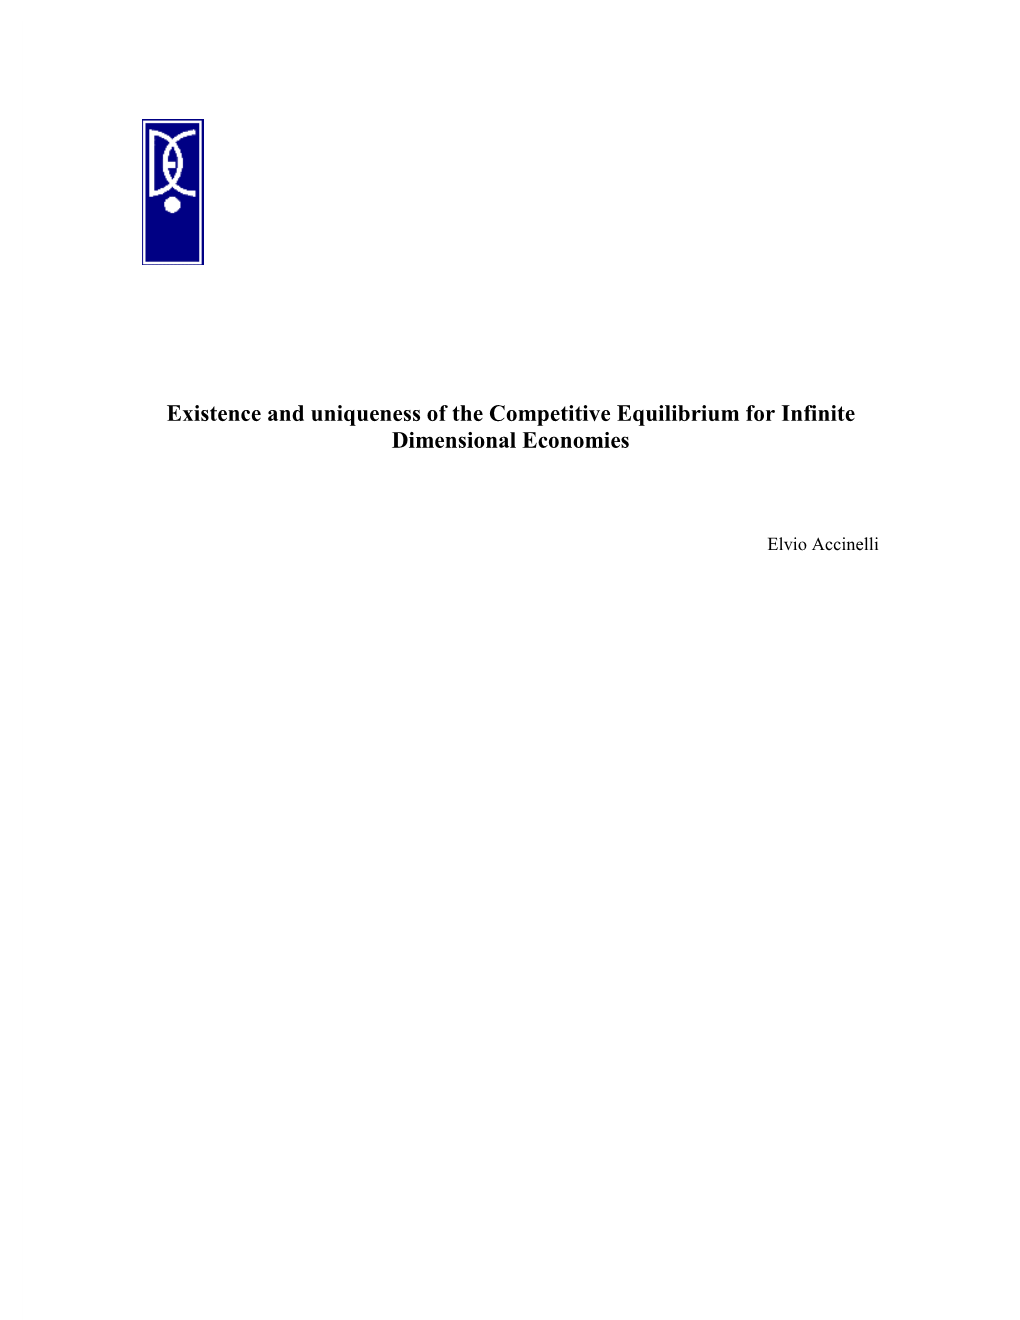 Existence and Uniqueness of the Competitive Equilibrium for Infinite Dimensional Economies